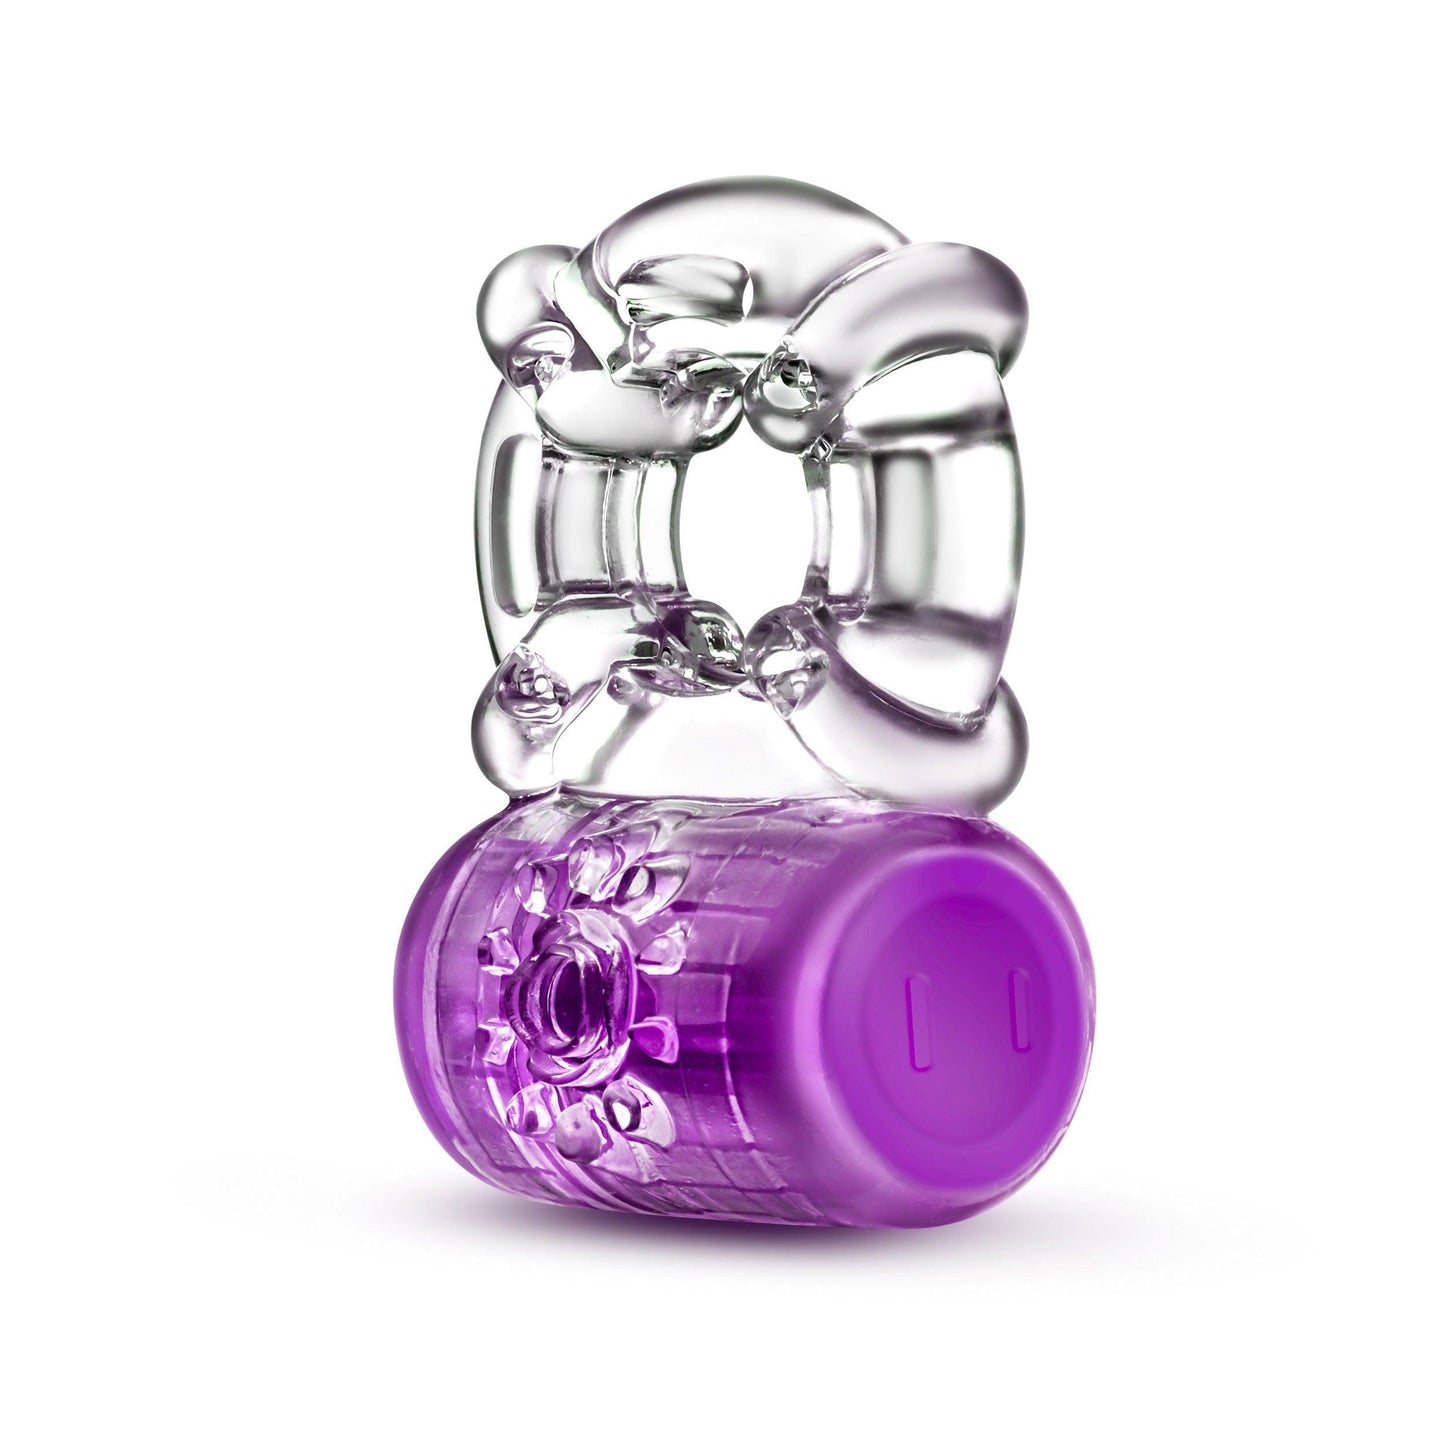 Play With Me - One Night Stand Vibrating C-Ring - Purple - My Sex Toy Hub